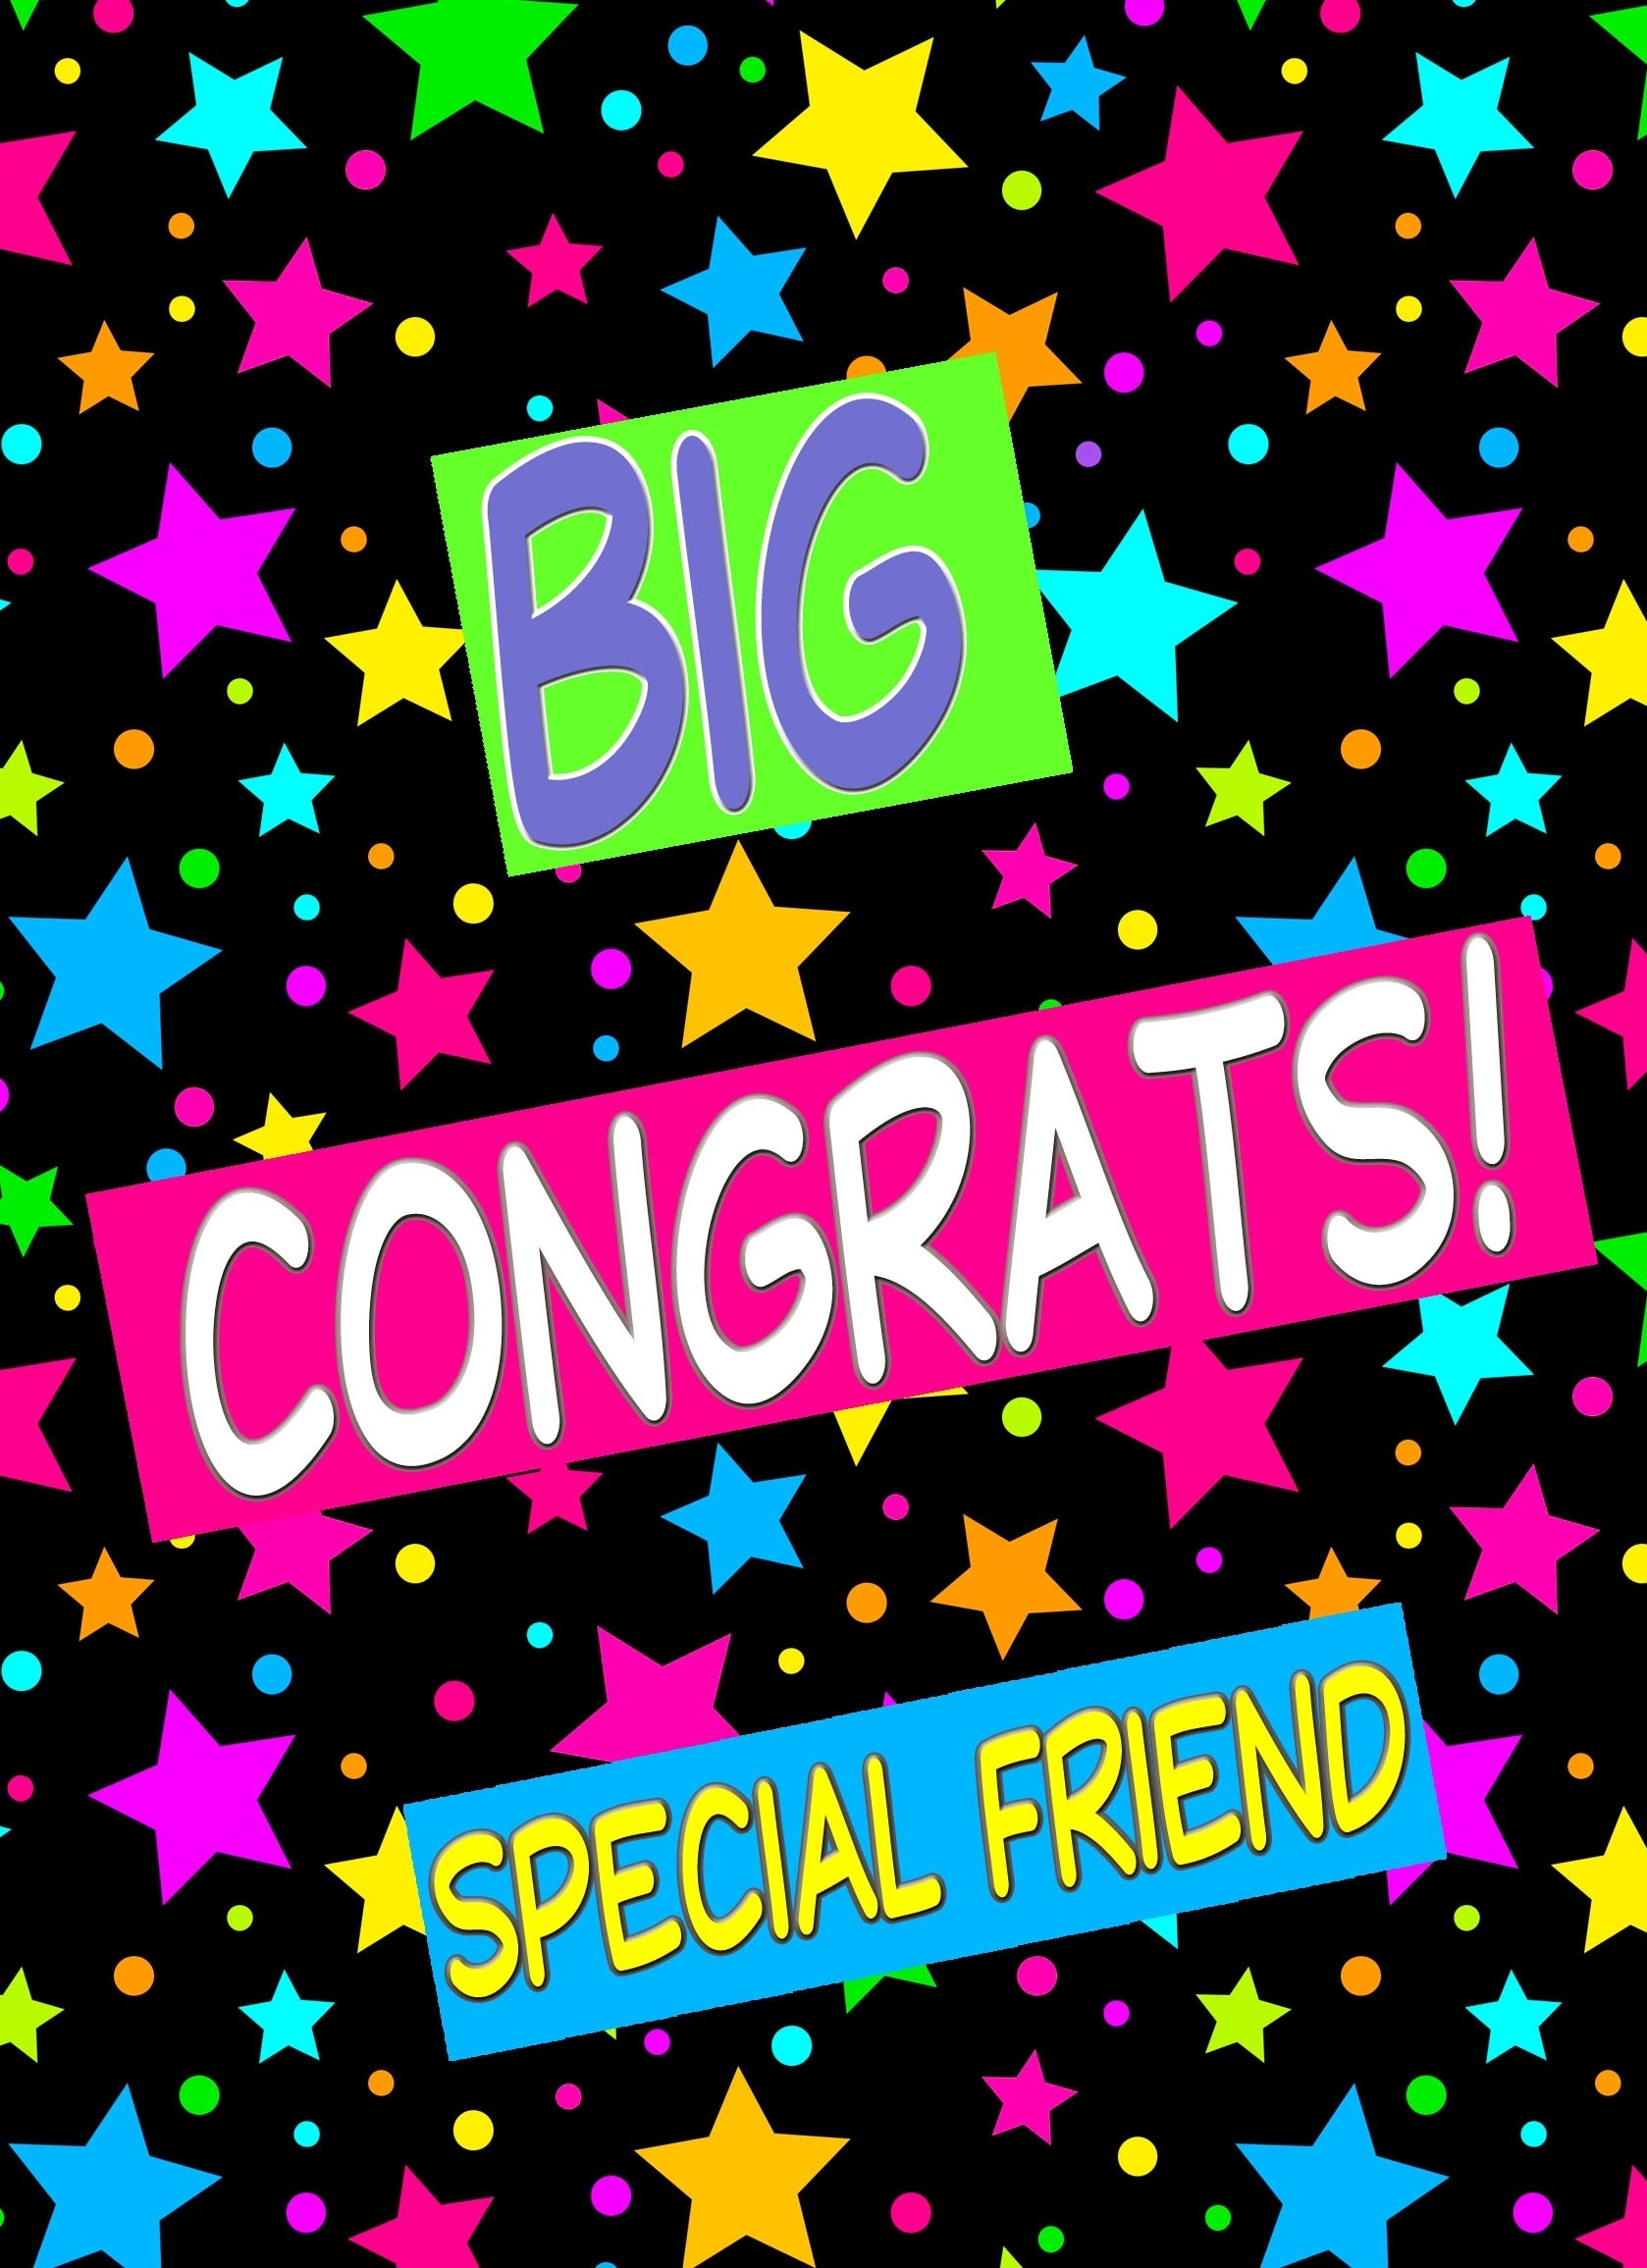 Congratulations Card For Special Friend (Stars)